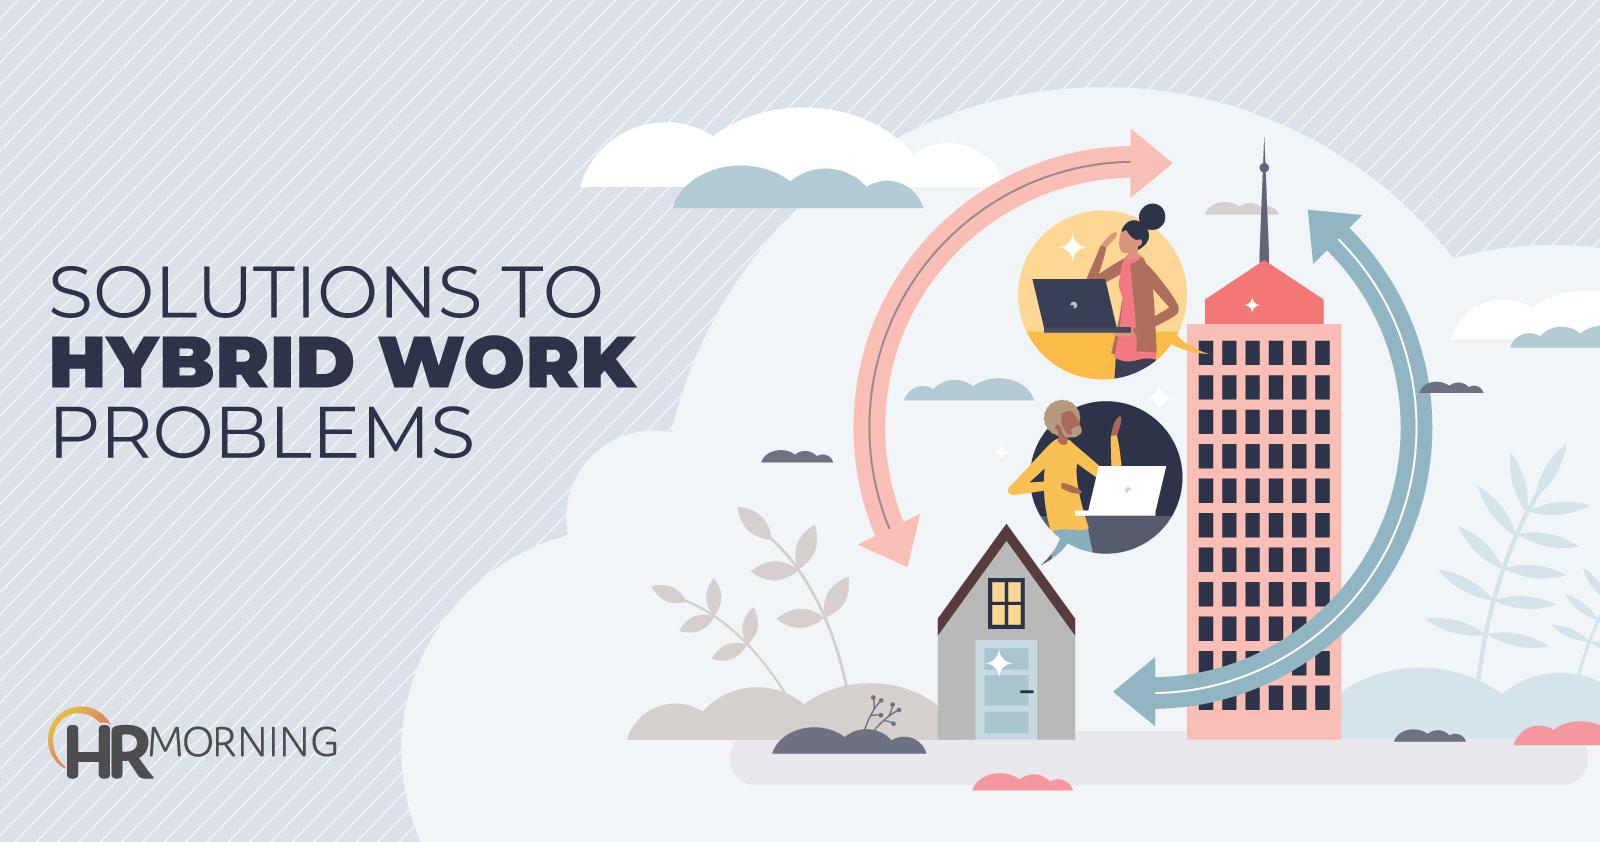 Solutions to hybrid work problems